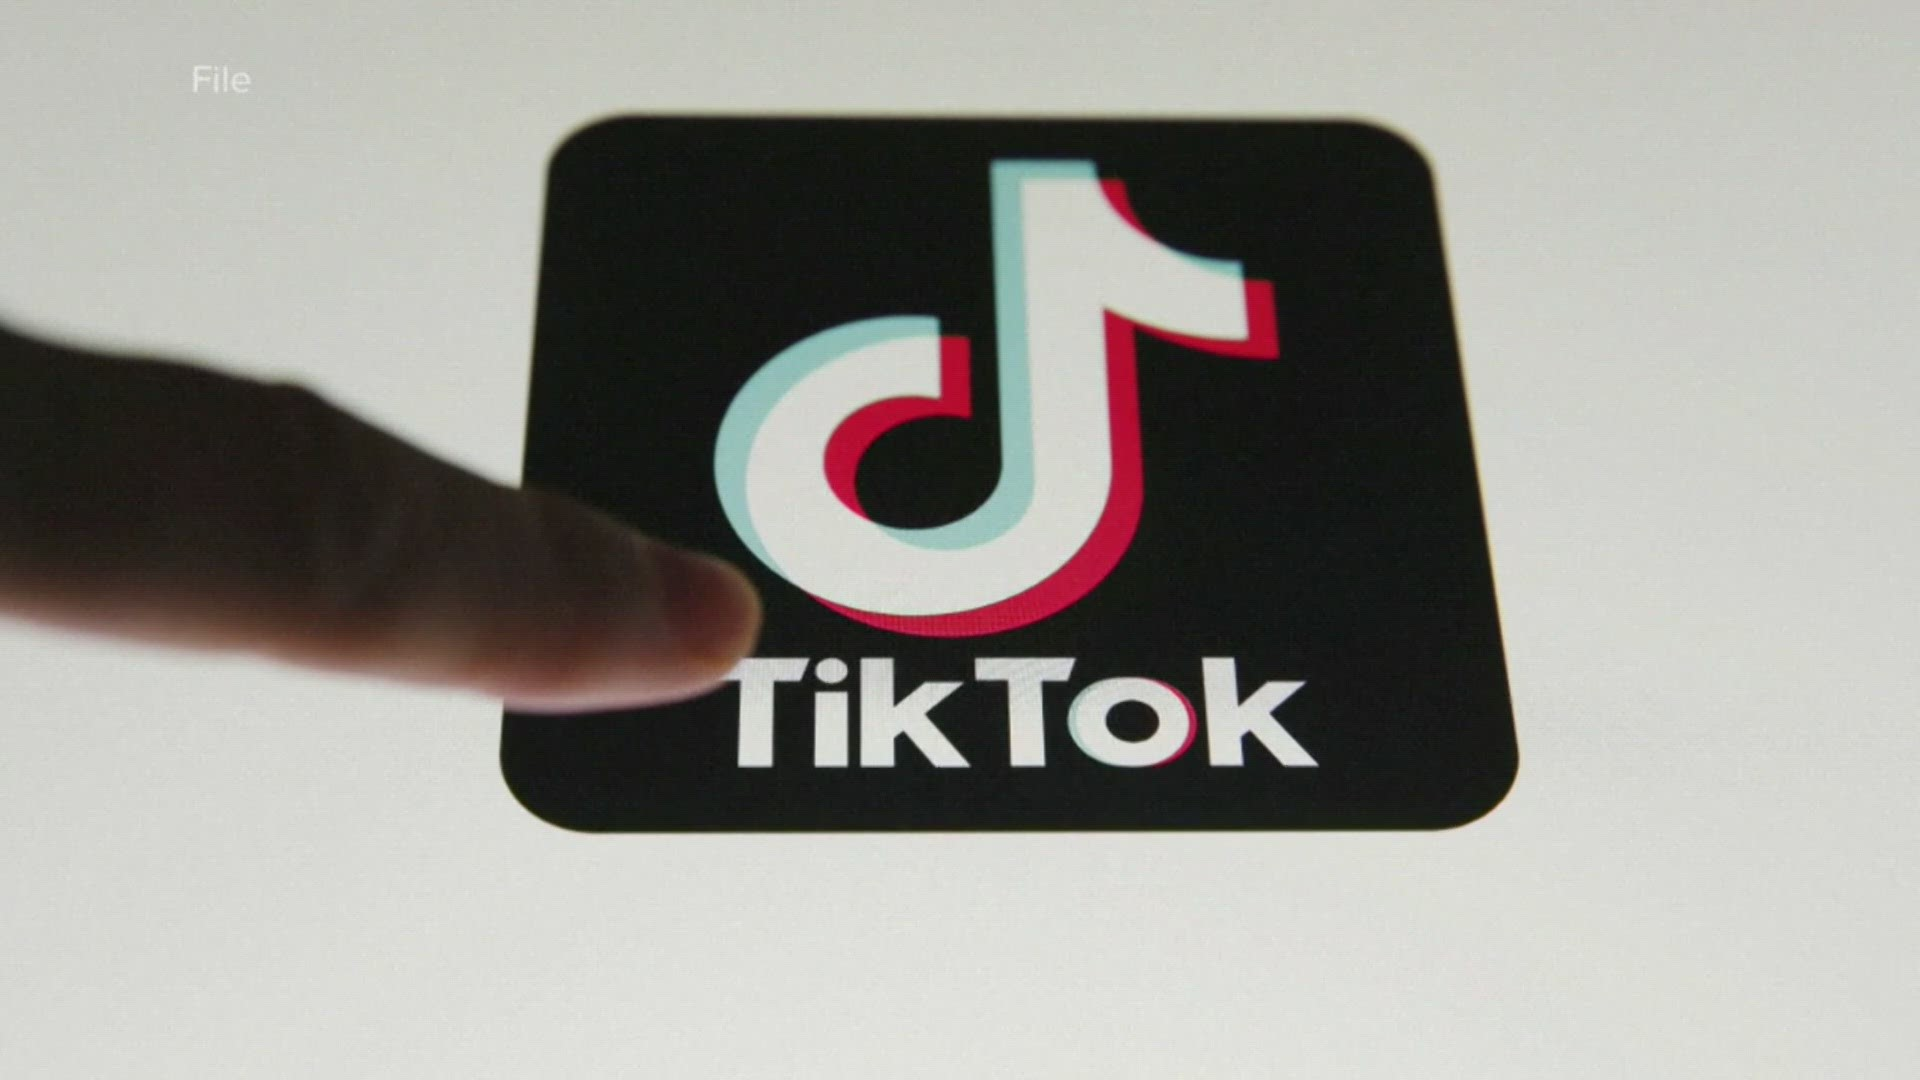 TIK TOK BAN SIGNED. JUST HOW DANGEROUS IS THIS APP?